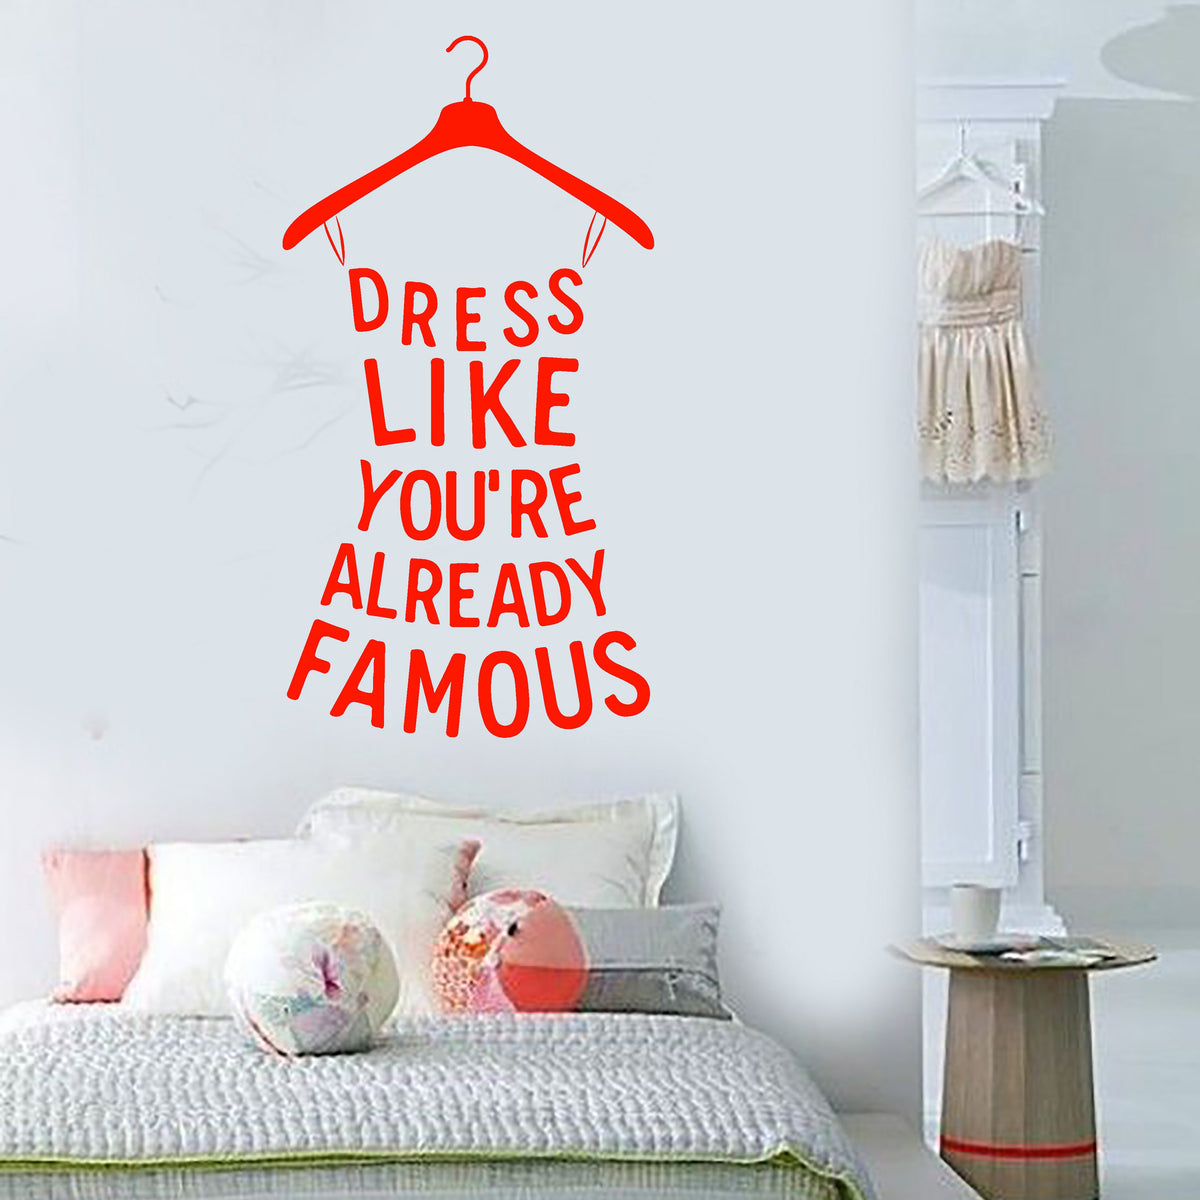 Vinyl Wall Decal Quote Fashion Shopping Words Girl Room Decor Stickers